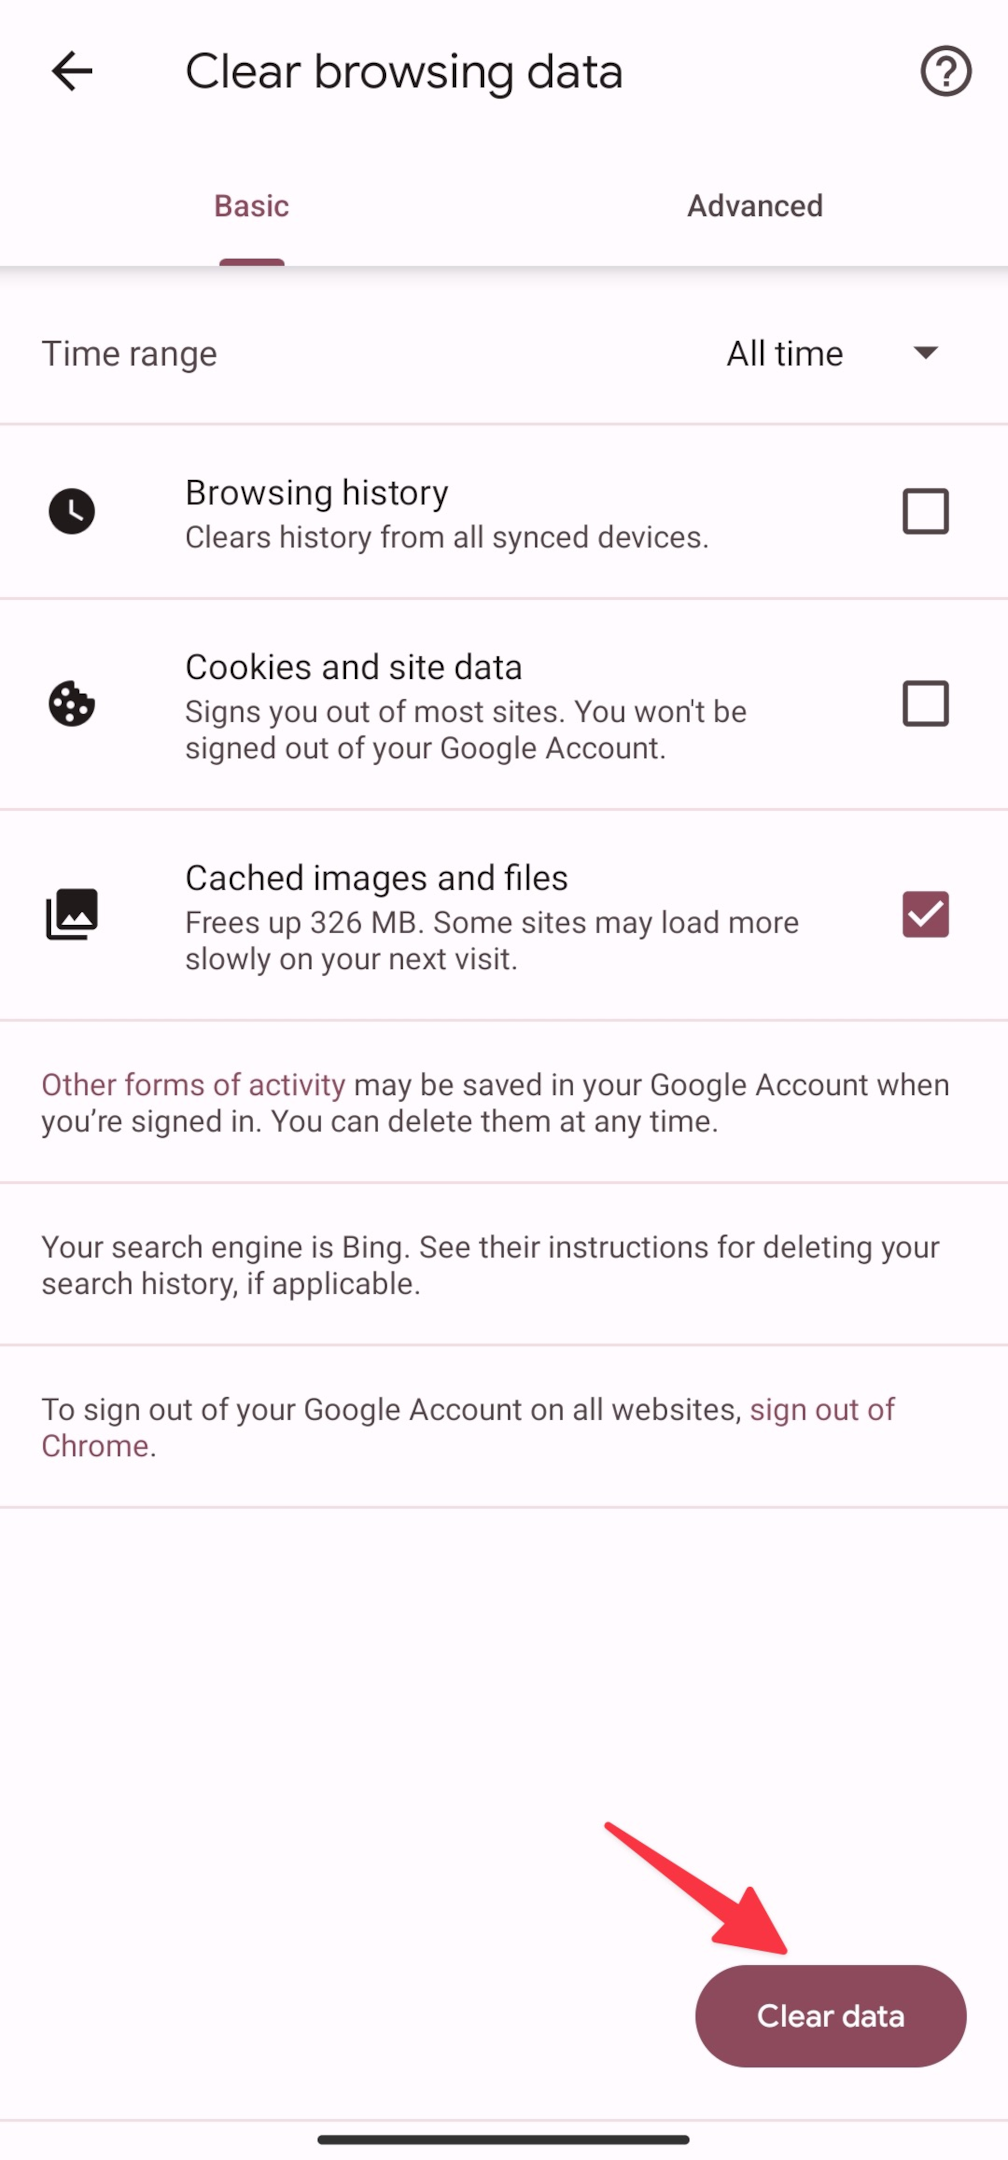 Remote.tools shows how to clear Google search history on an Android device. Tap on Clear data button to remove all the search entries based on the selection of time frame you've made.